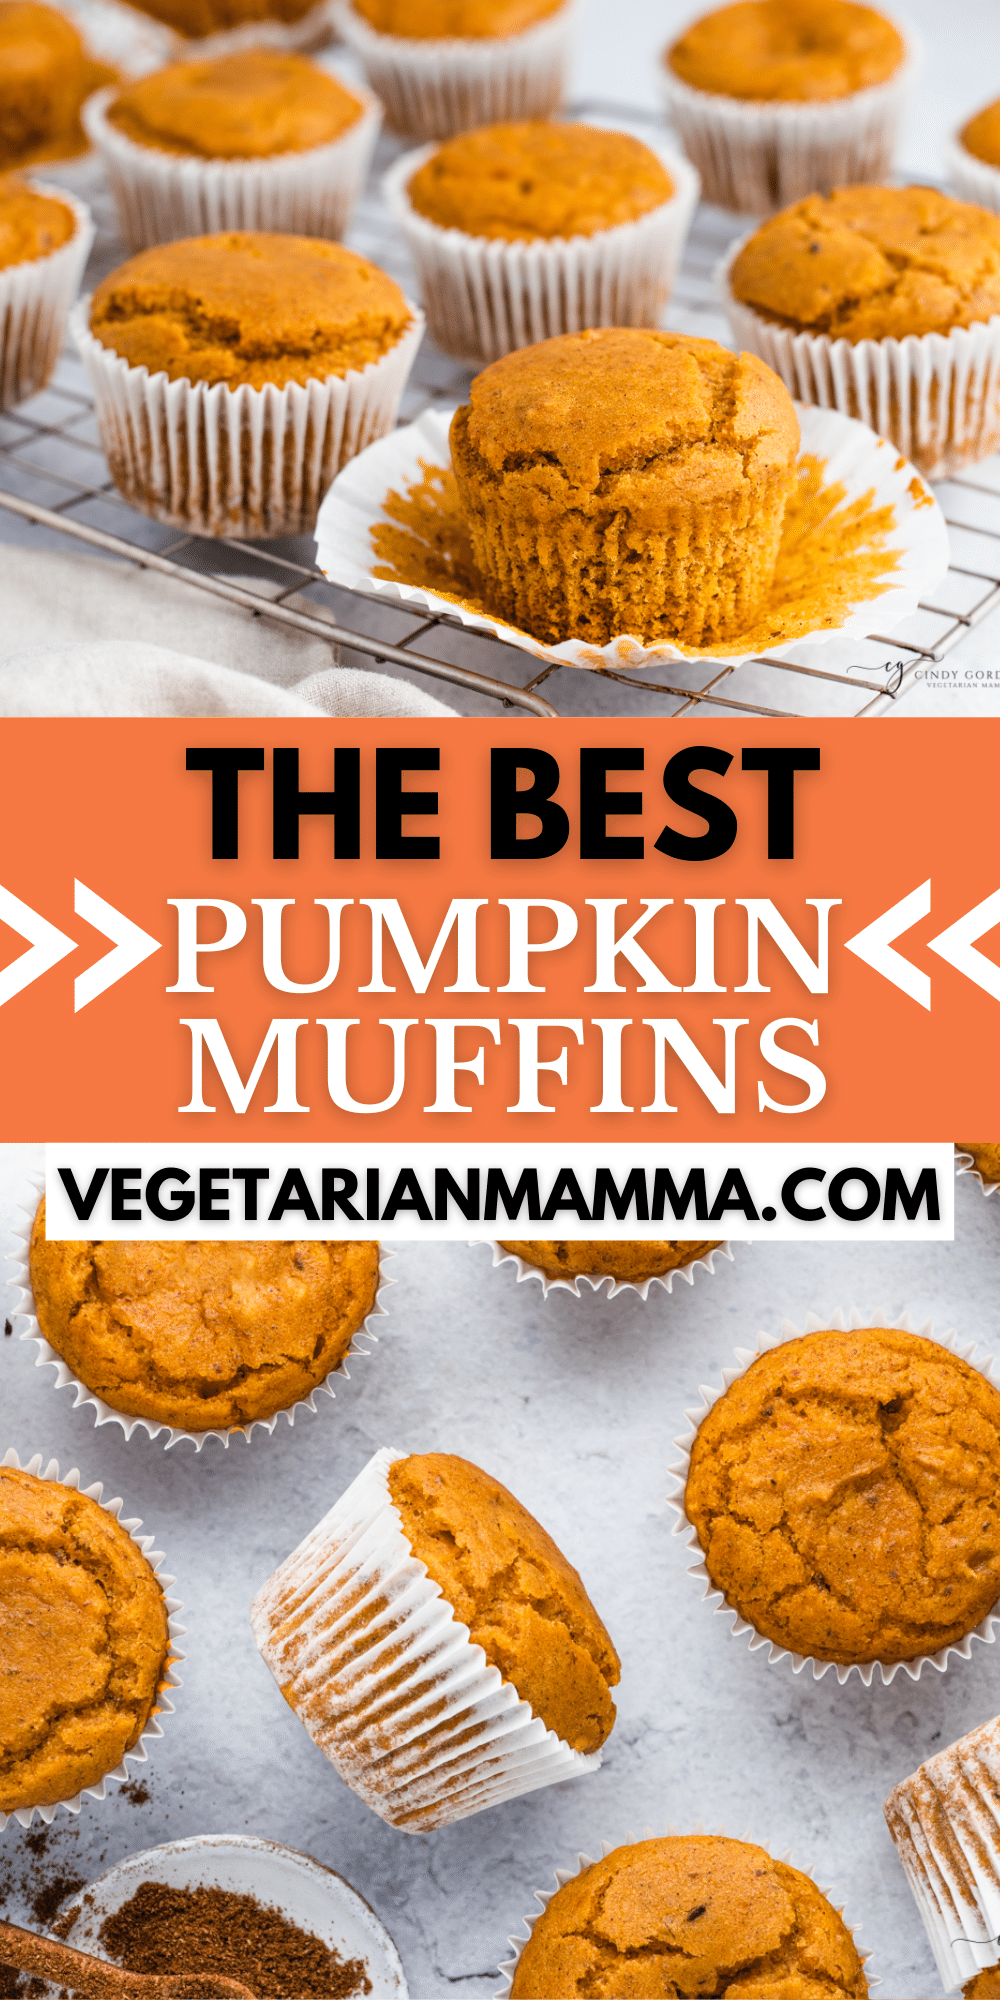 An unwrapped pumpkin muffin on a wire cooling rack in front of more muffins with overlay text